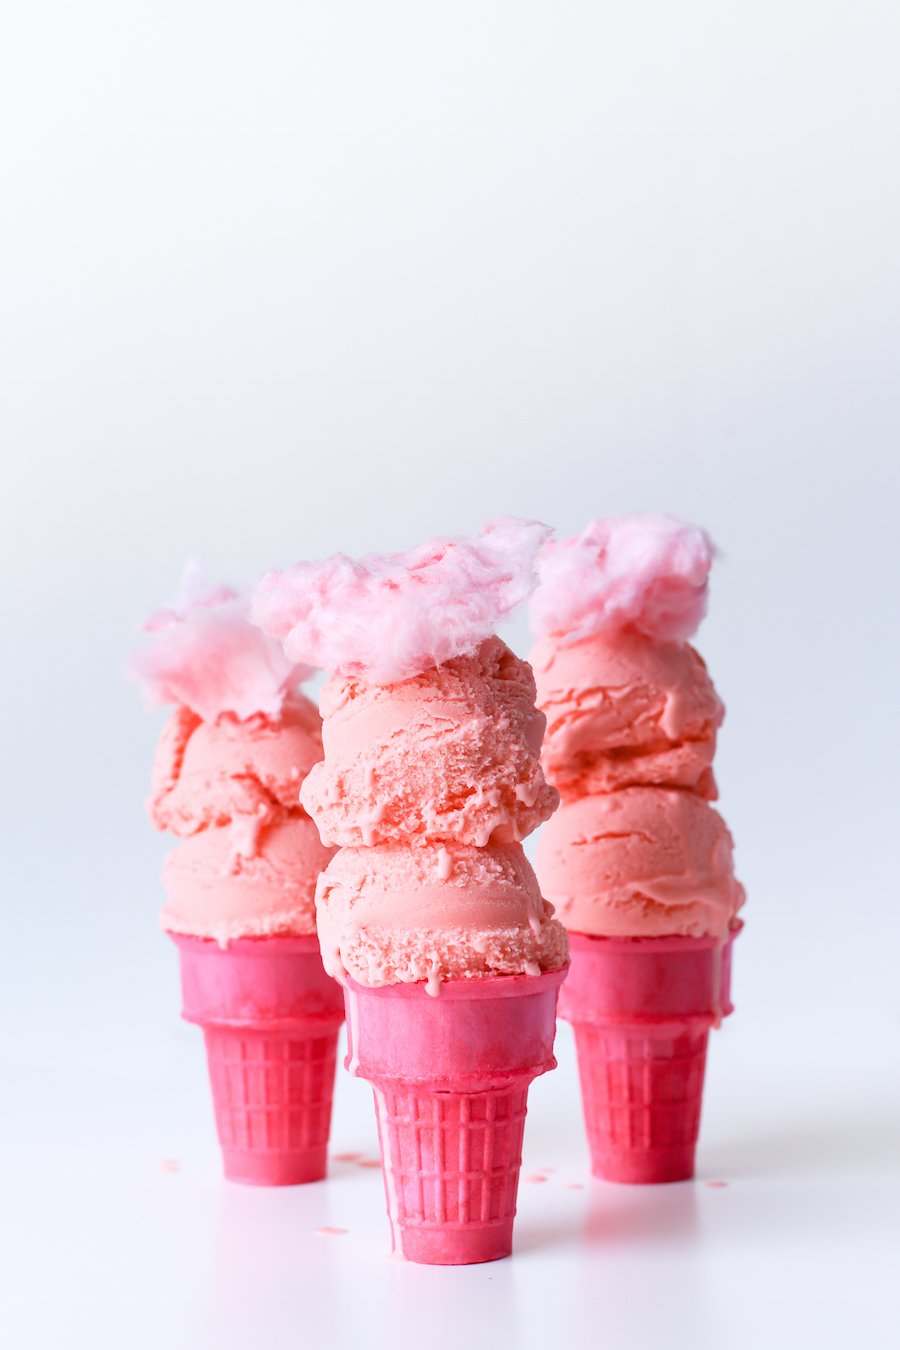 Ready to try THE ice cream flavor of summer: Cotton Candy Ice Cream! It reminds me of the state fair and theme parks! // saltycanary.com